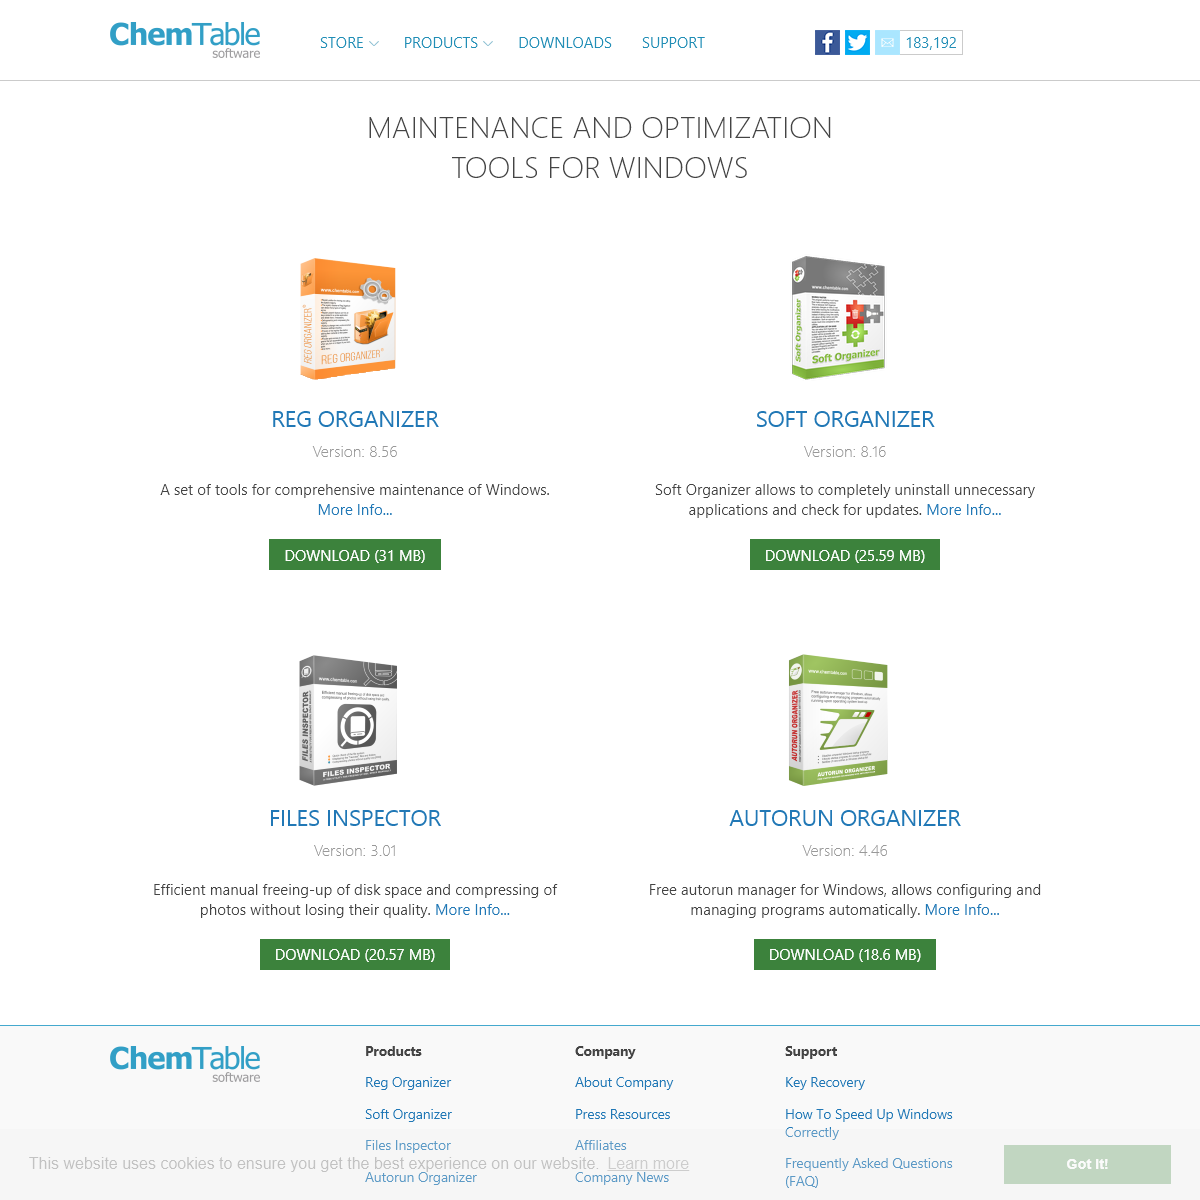 A complete backup of chemtable.com